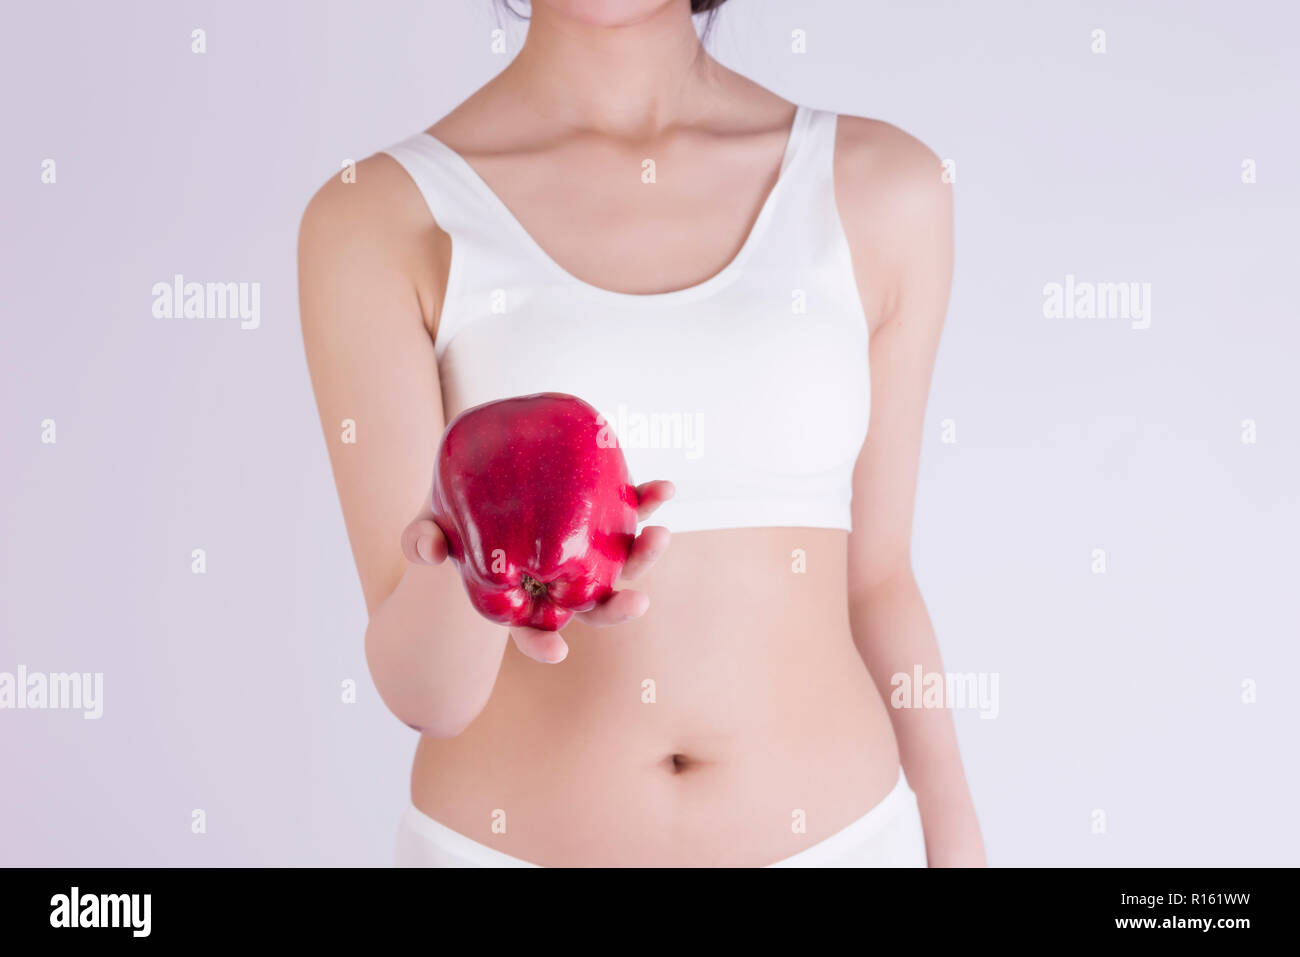 Woman holding a fresh apple, and perfect slim body, diet, healthy lifestyle. Stock Photo